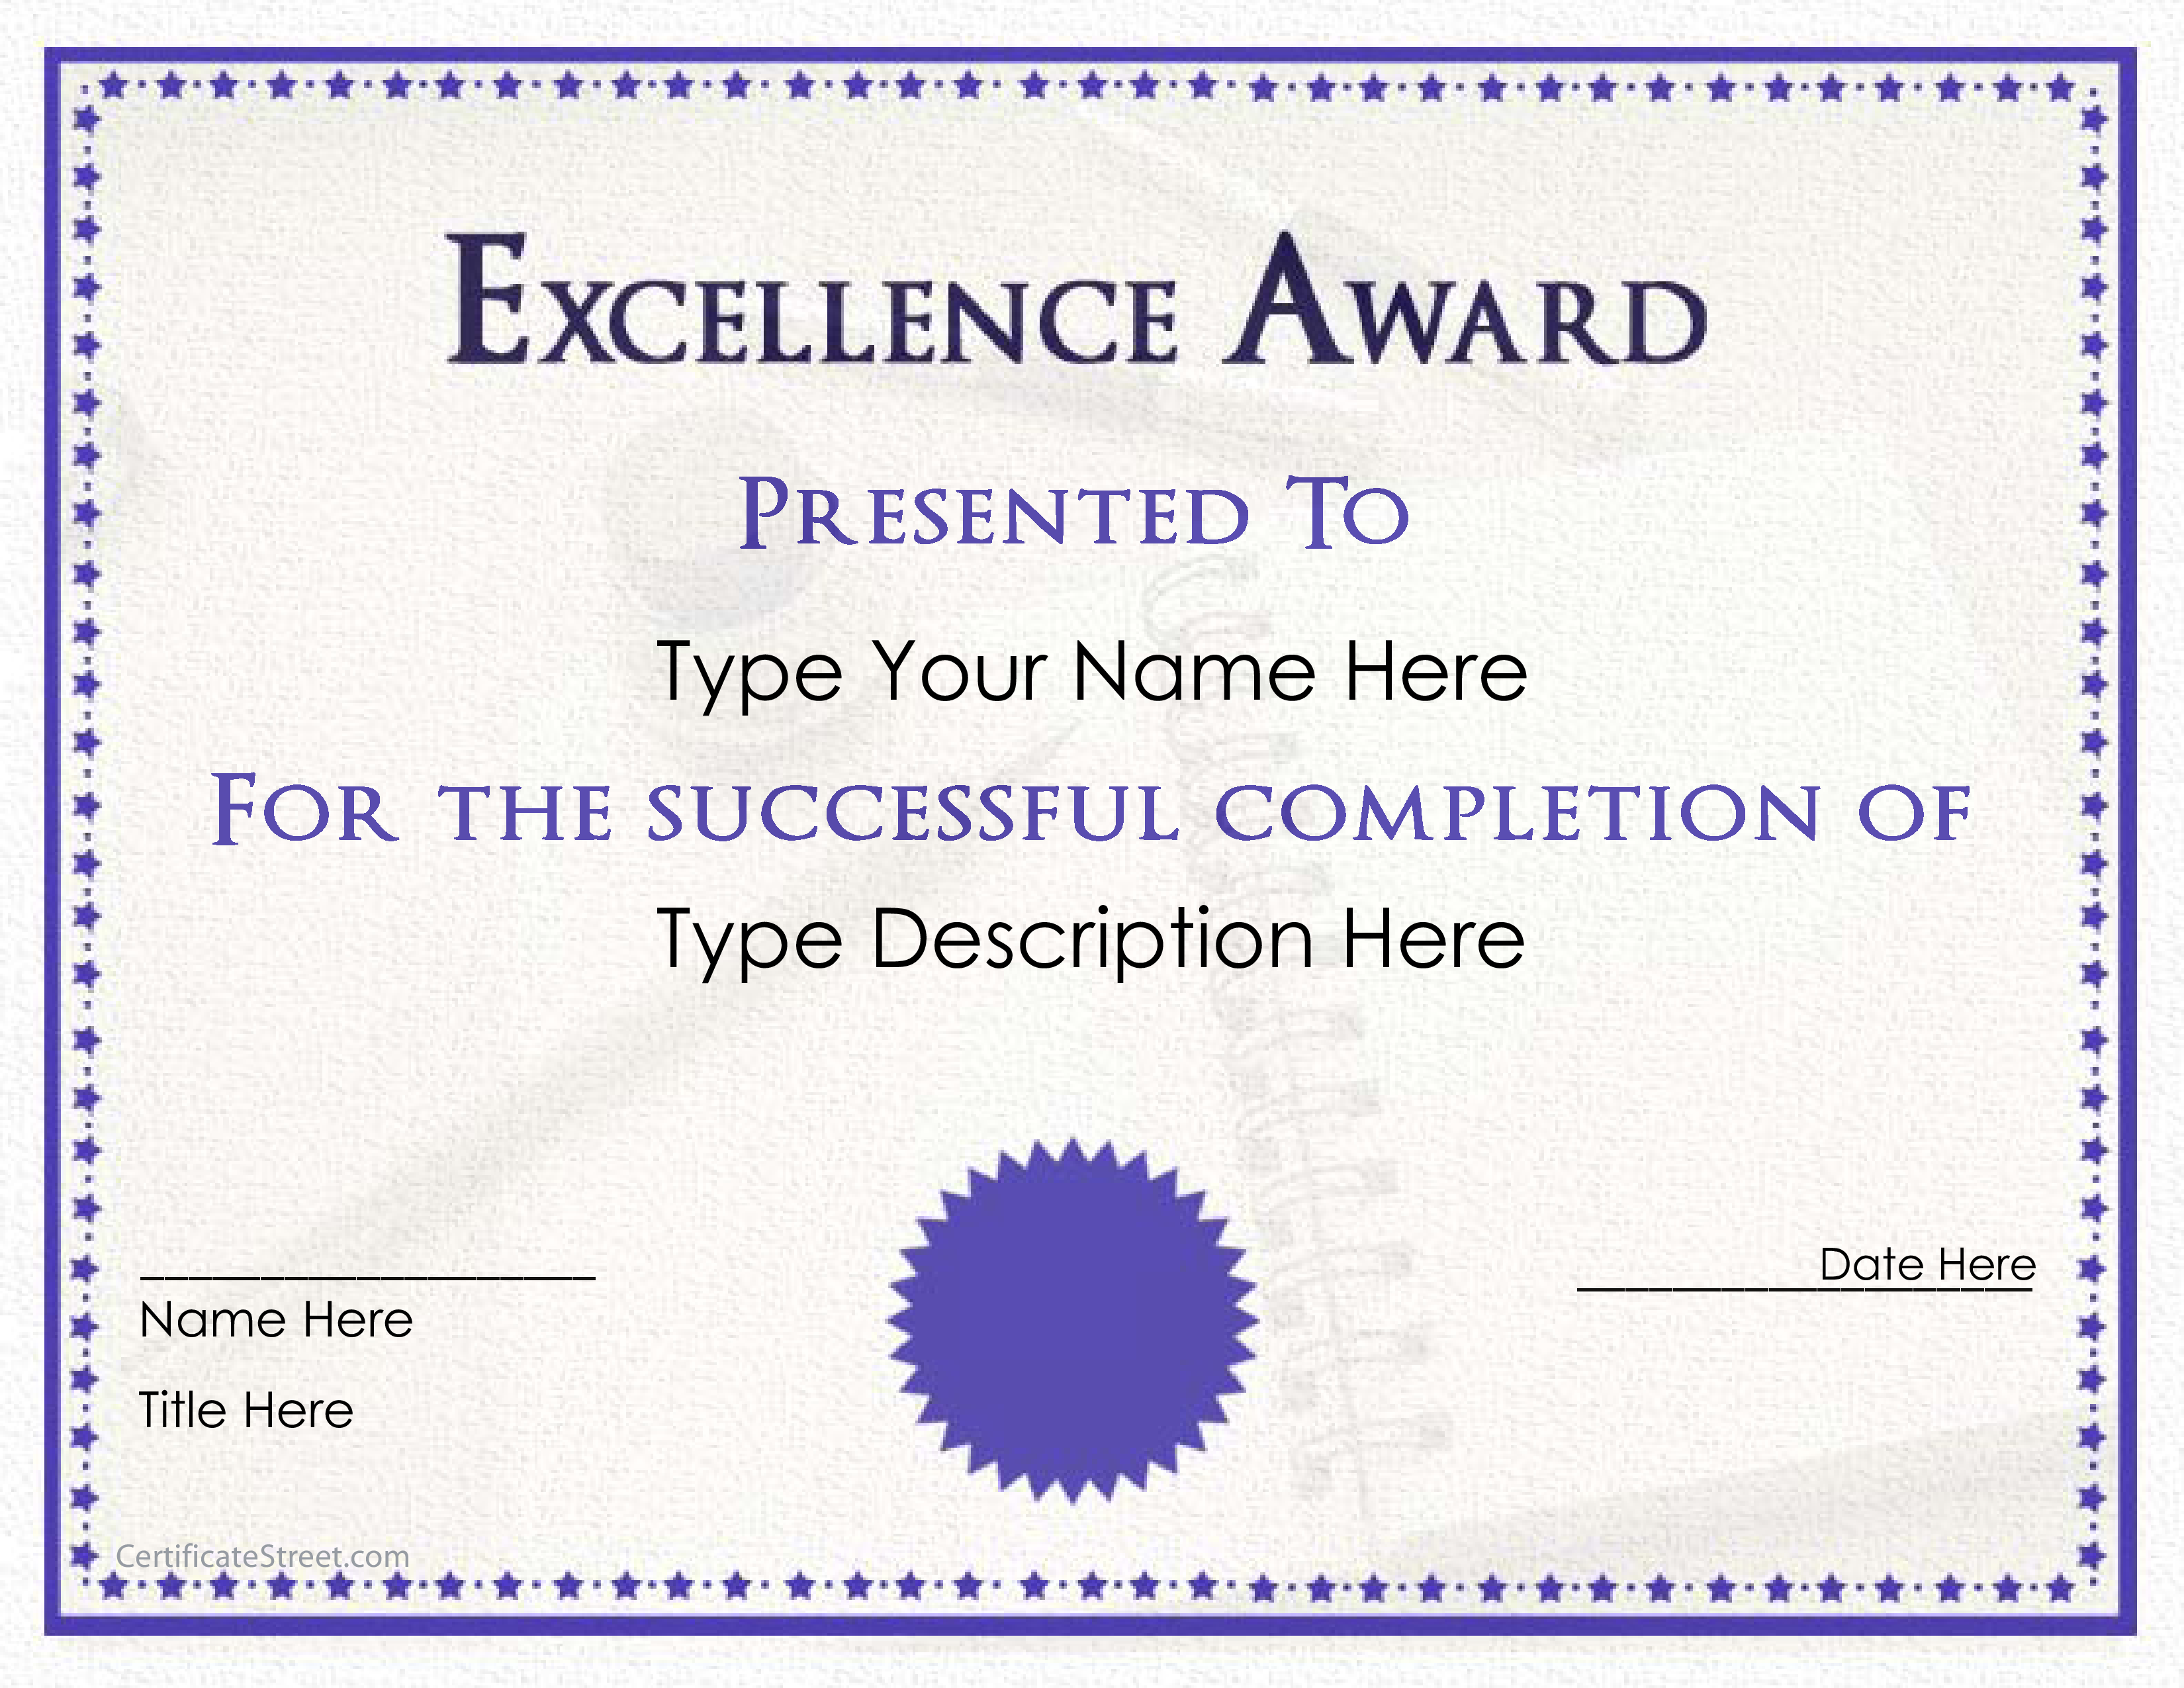 Excellence Award Certificate | Templates at ...